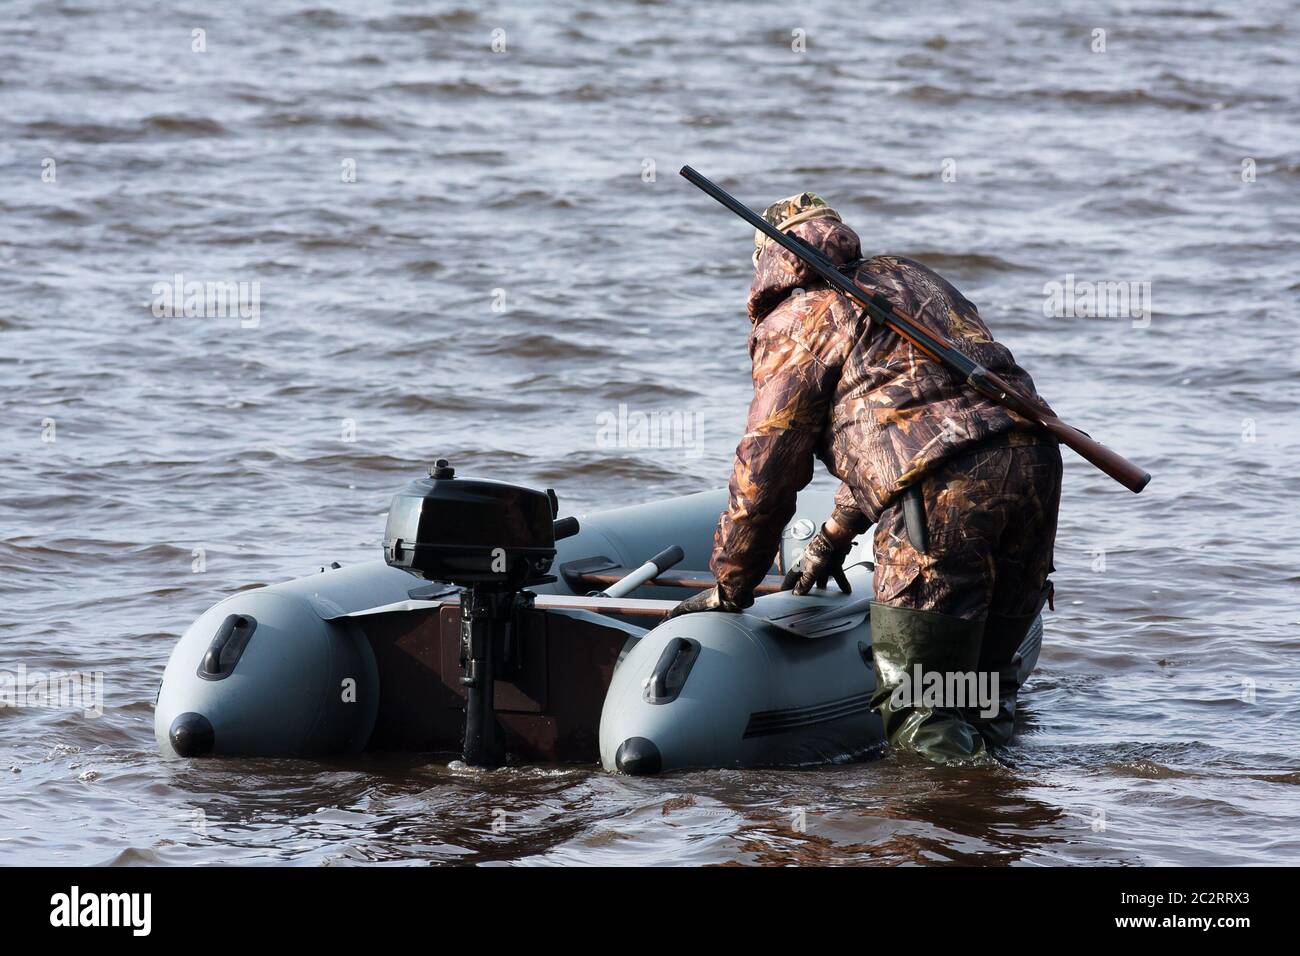 hunter pulls the boat from shoal Stock Photo